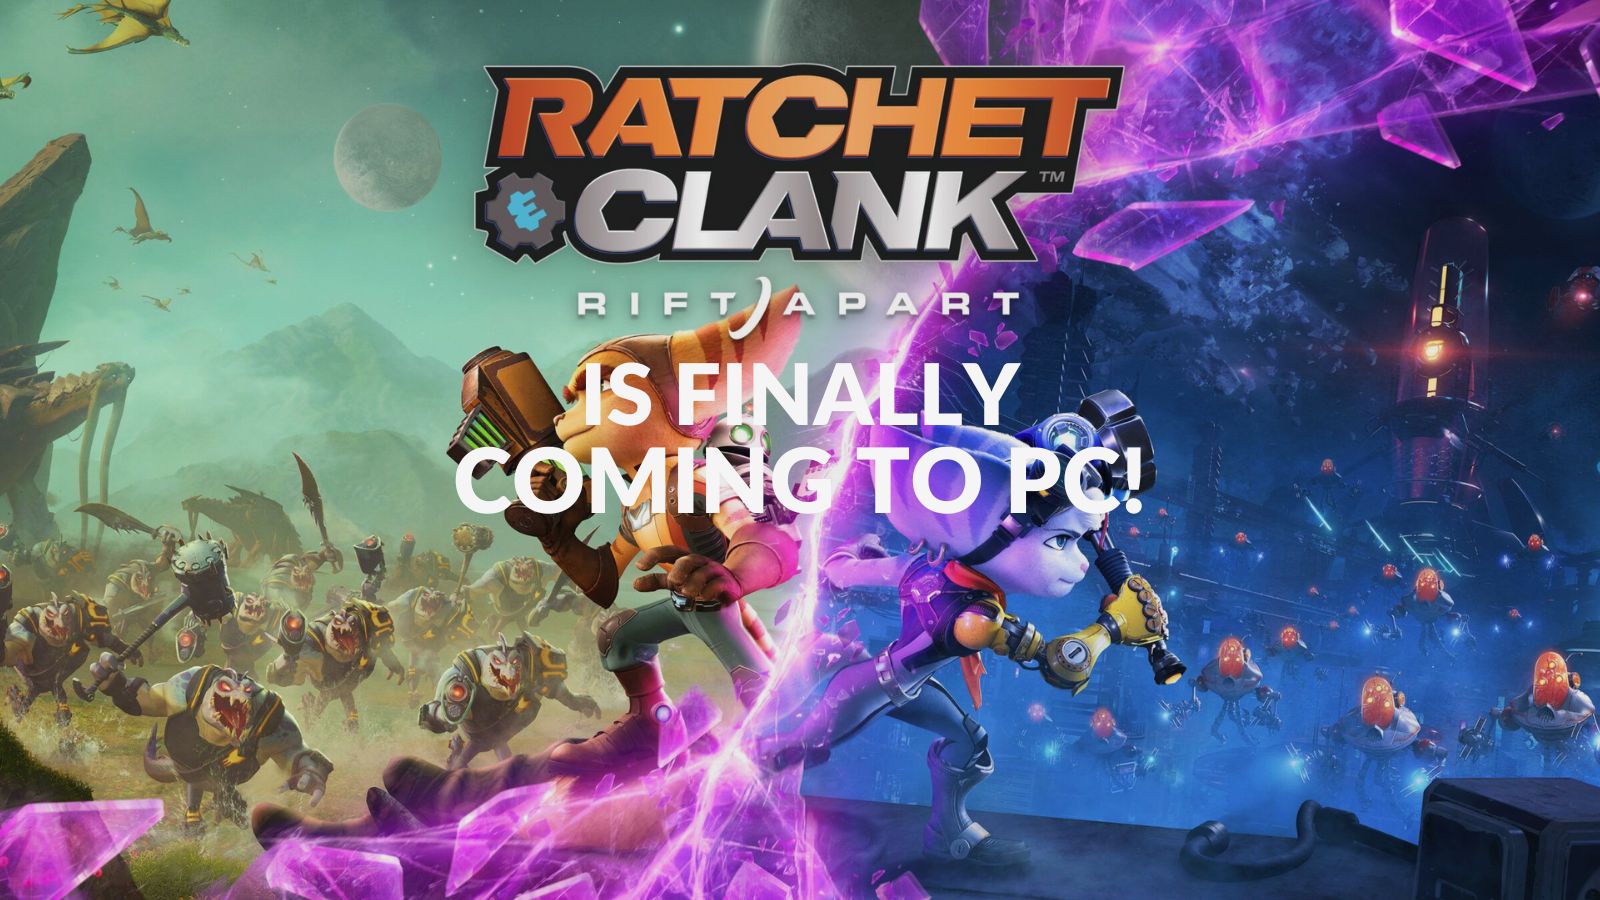 Ratchet & Clank: Rift Apart is Finally Coming to PC!